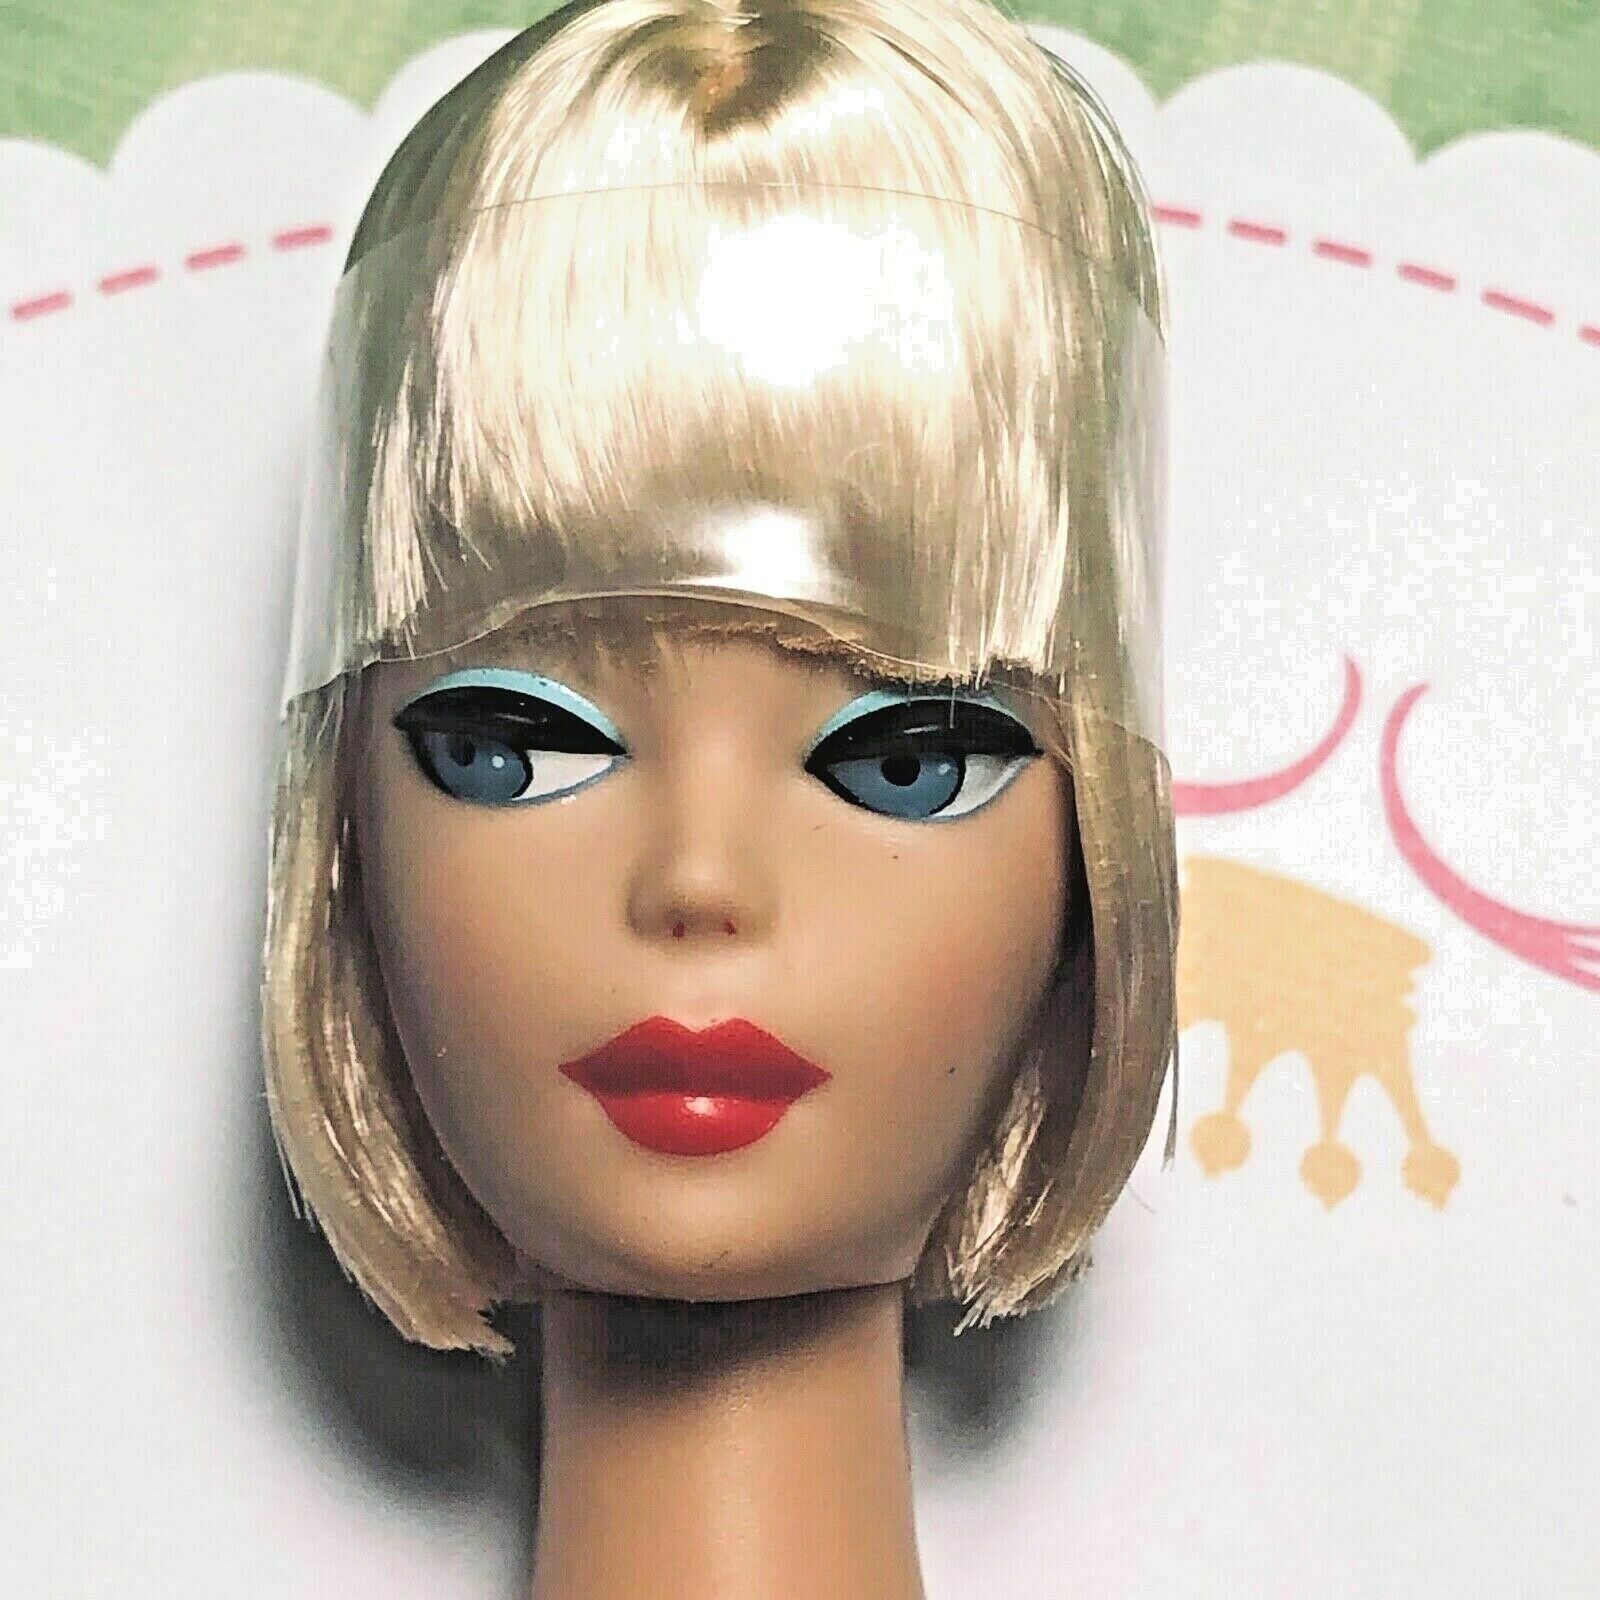 Vintage Repro Reproduction Blonde American Girl Barbie Bend Leg Lucy Lips